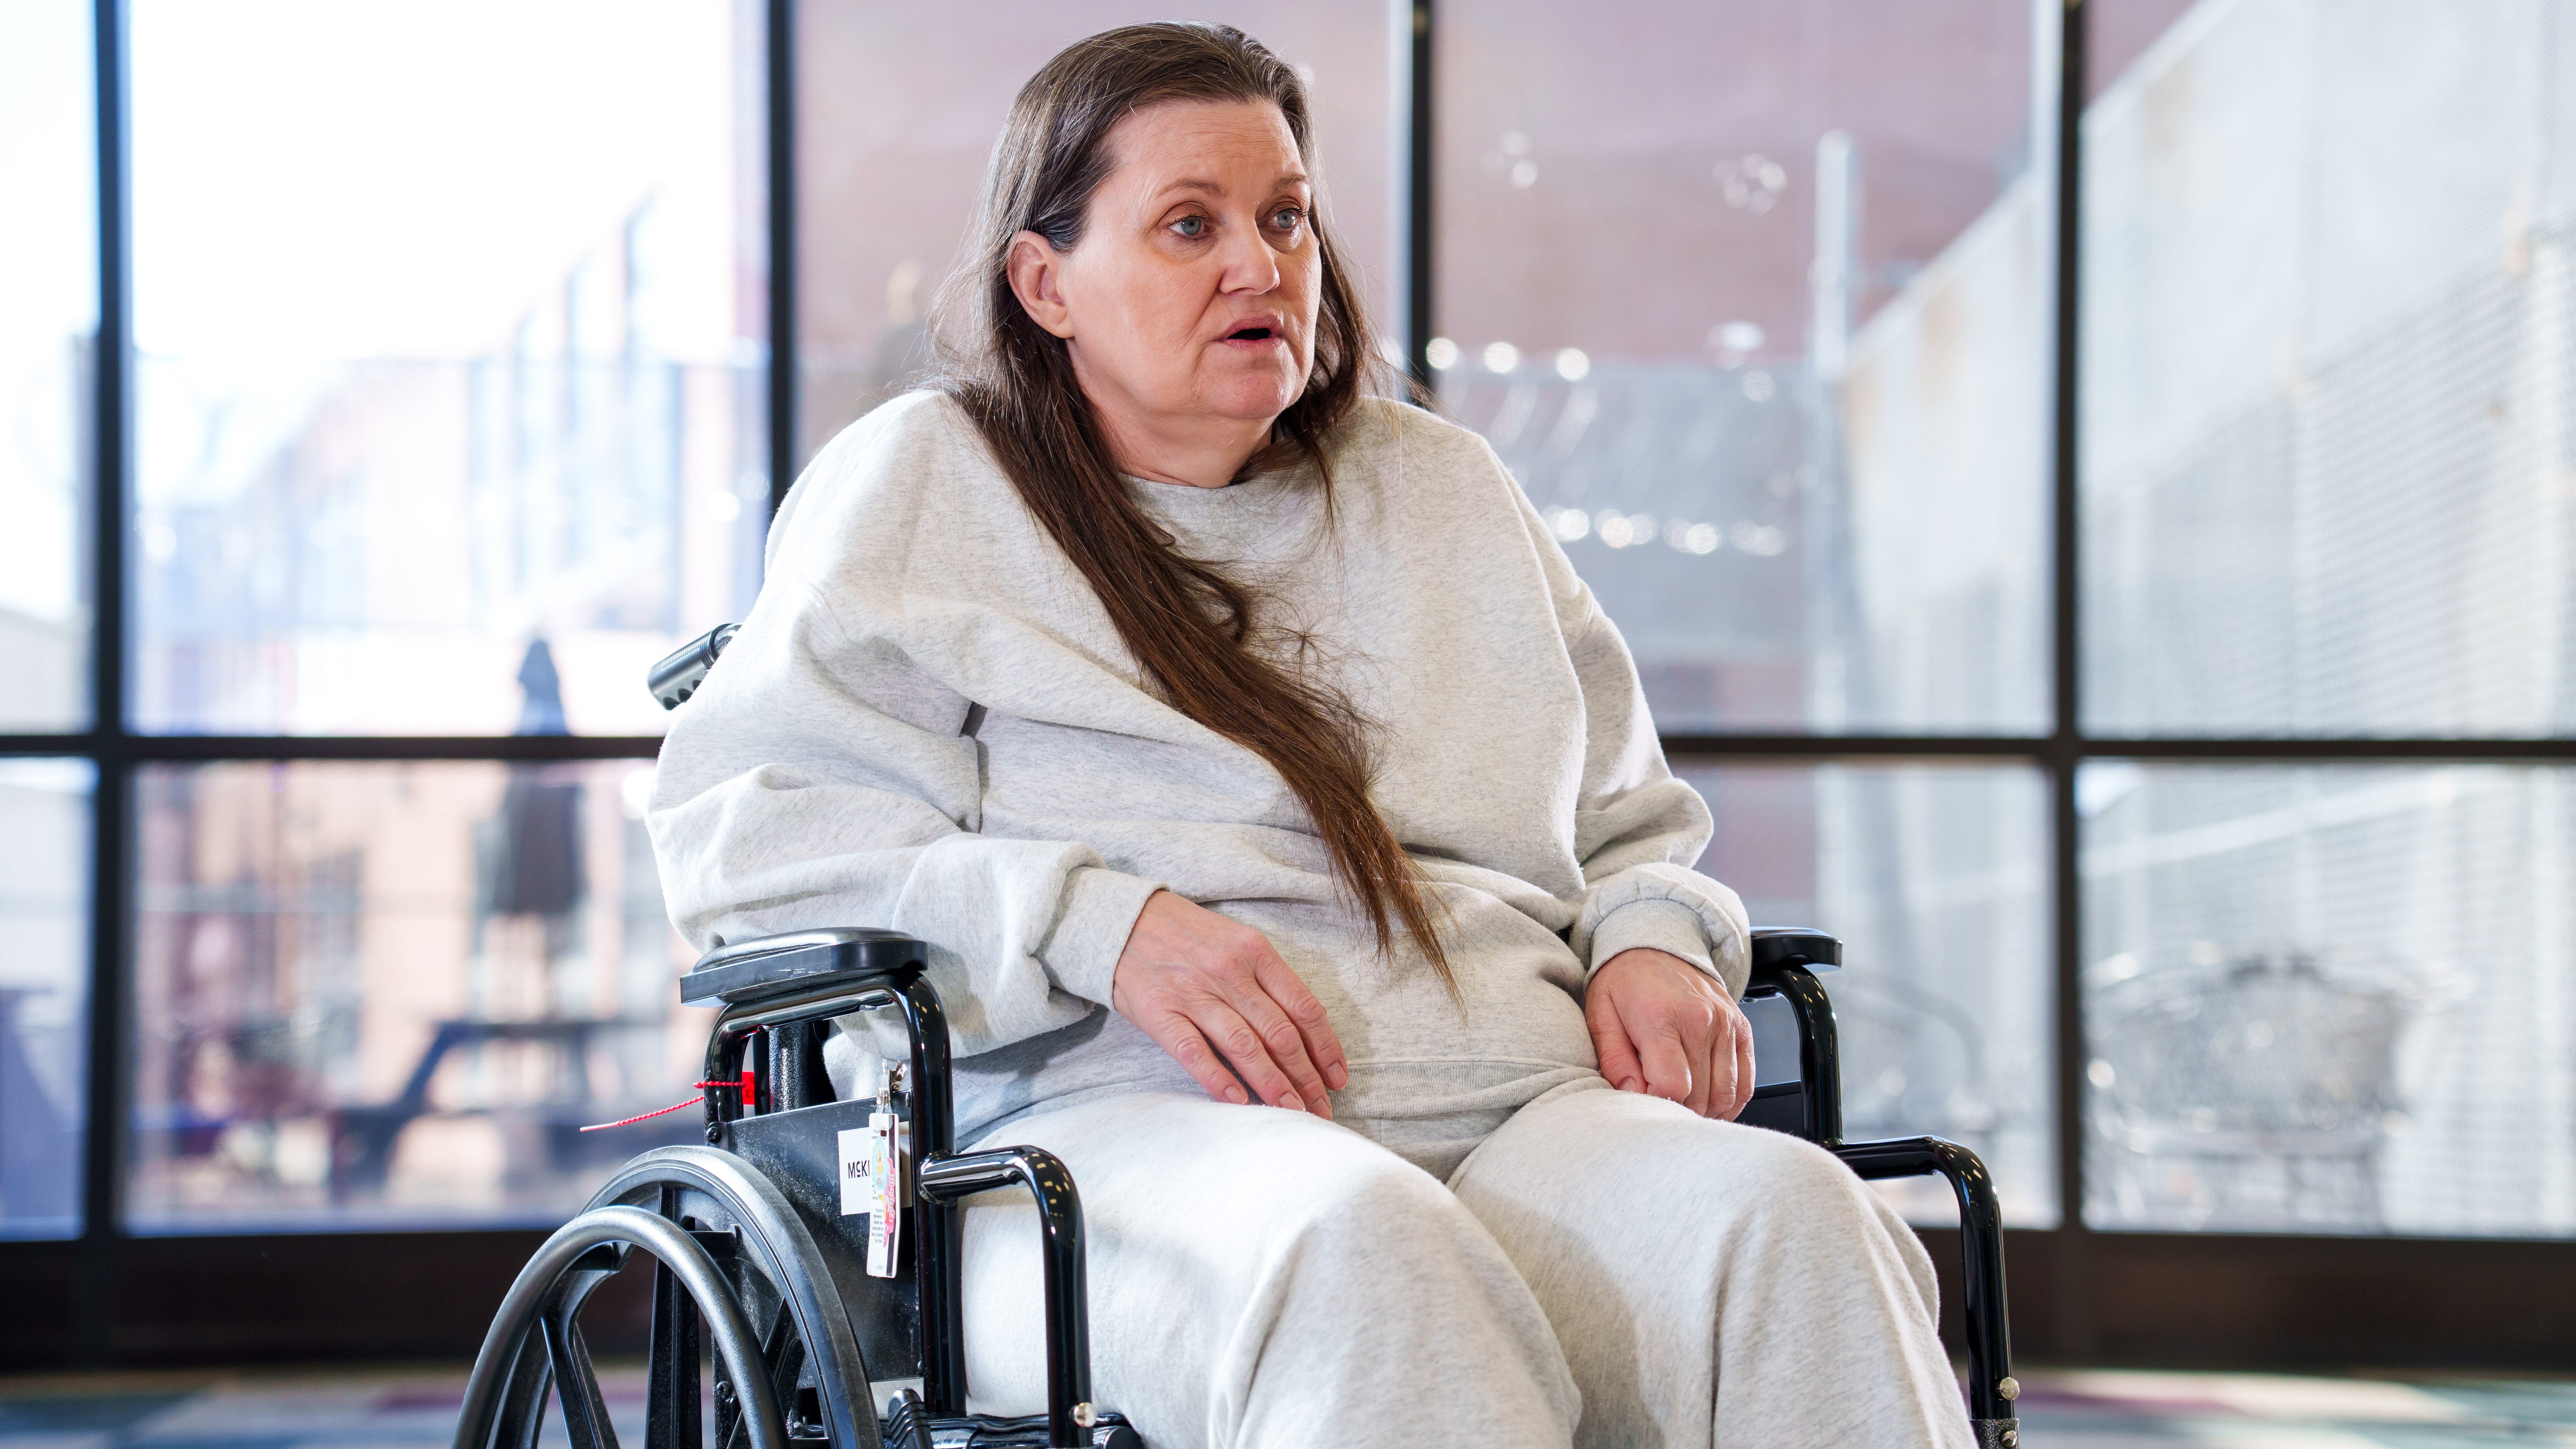 She's in constant pain and confined to a wheelchair. Is prison still necessary?